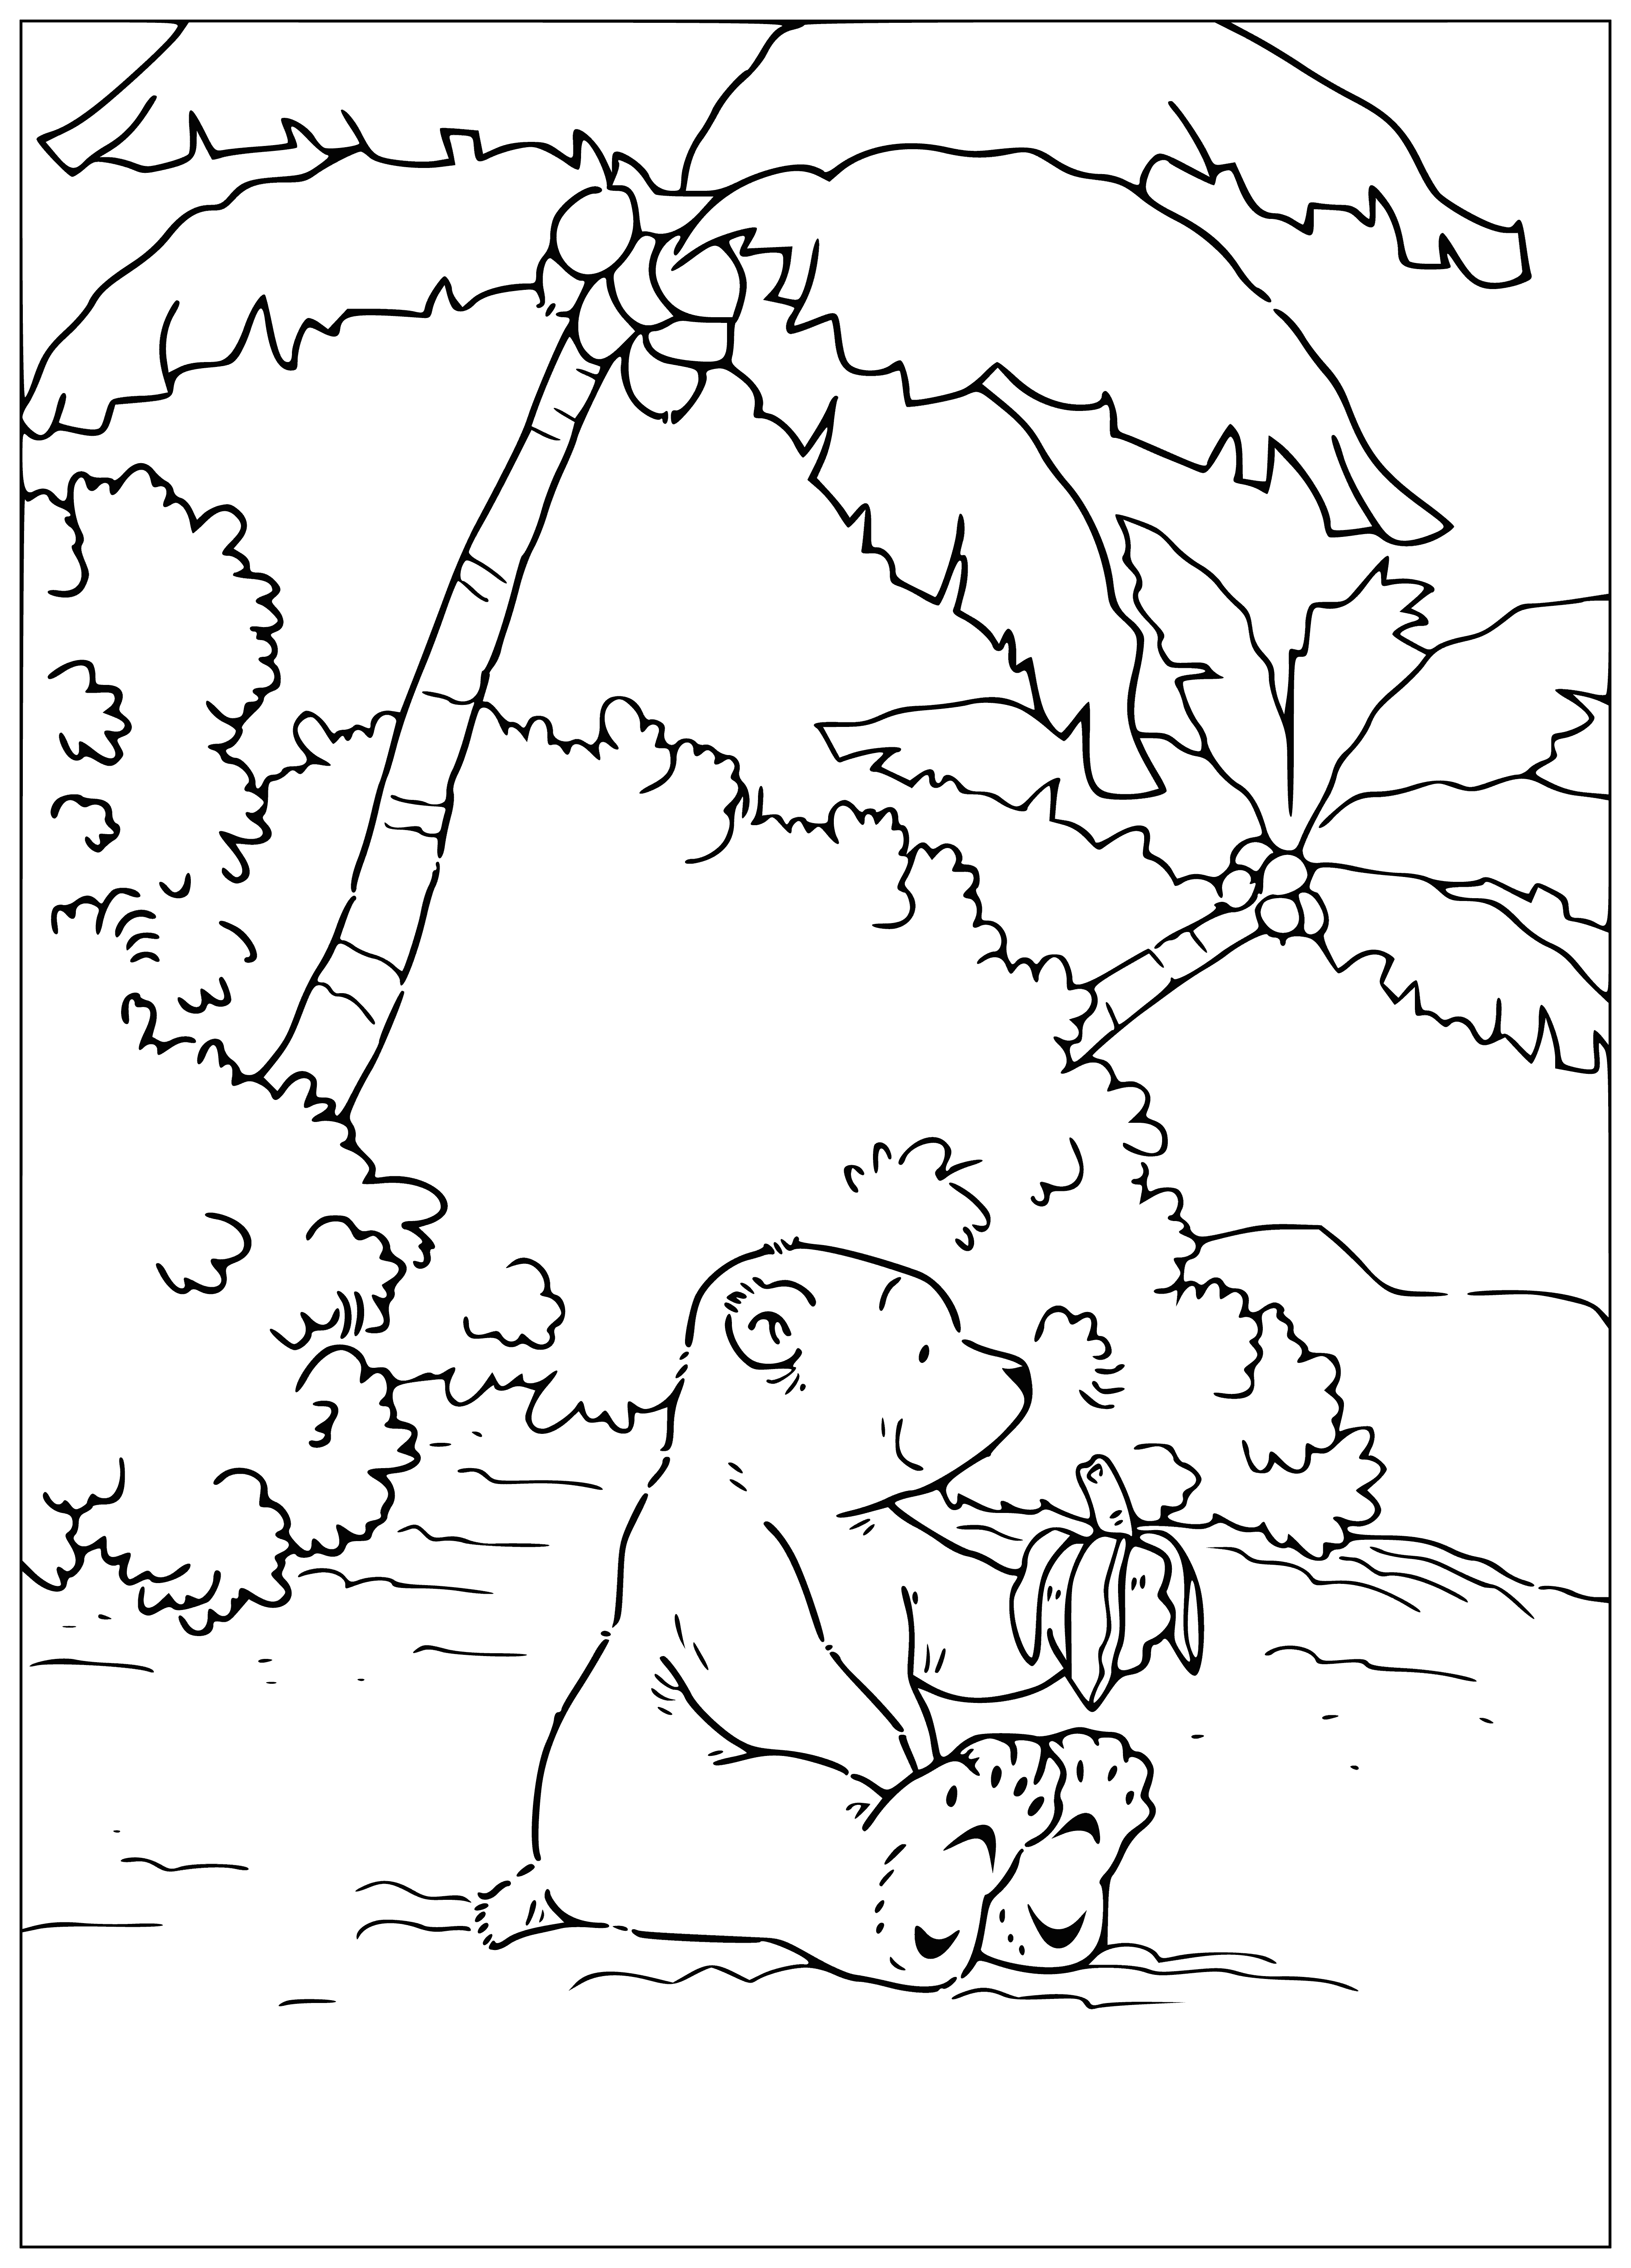 coloring page: A small polar bear holds a banana while standing on a patch of ice. Penguins are behind him. #coloringpage